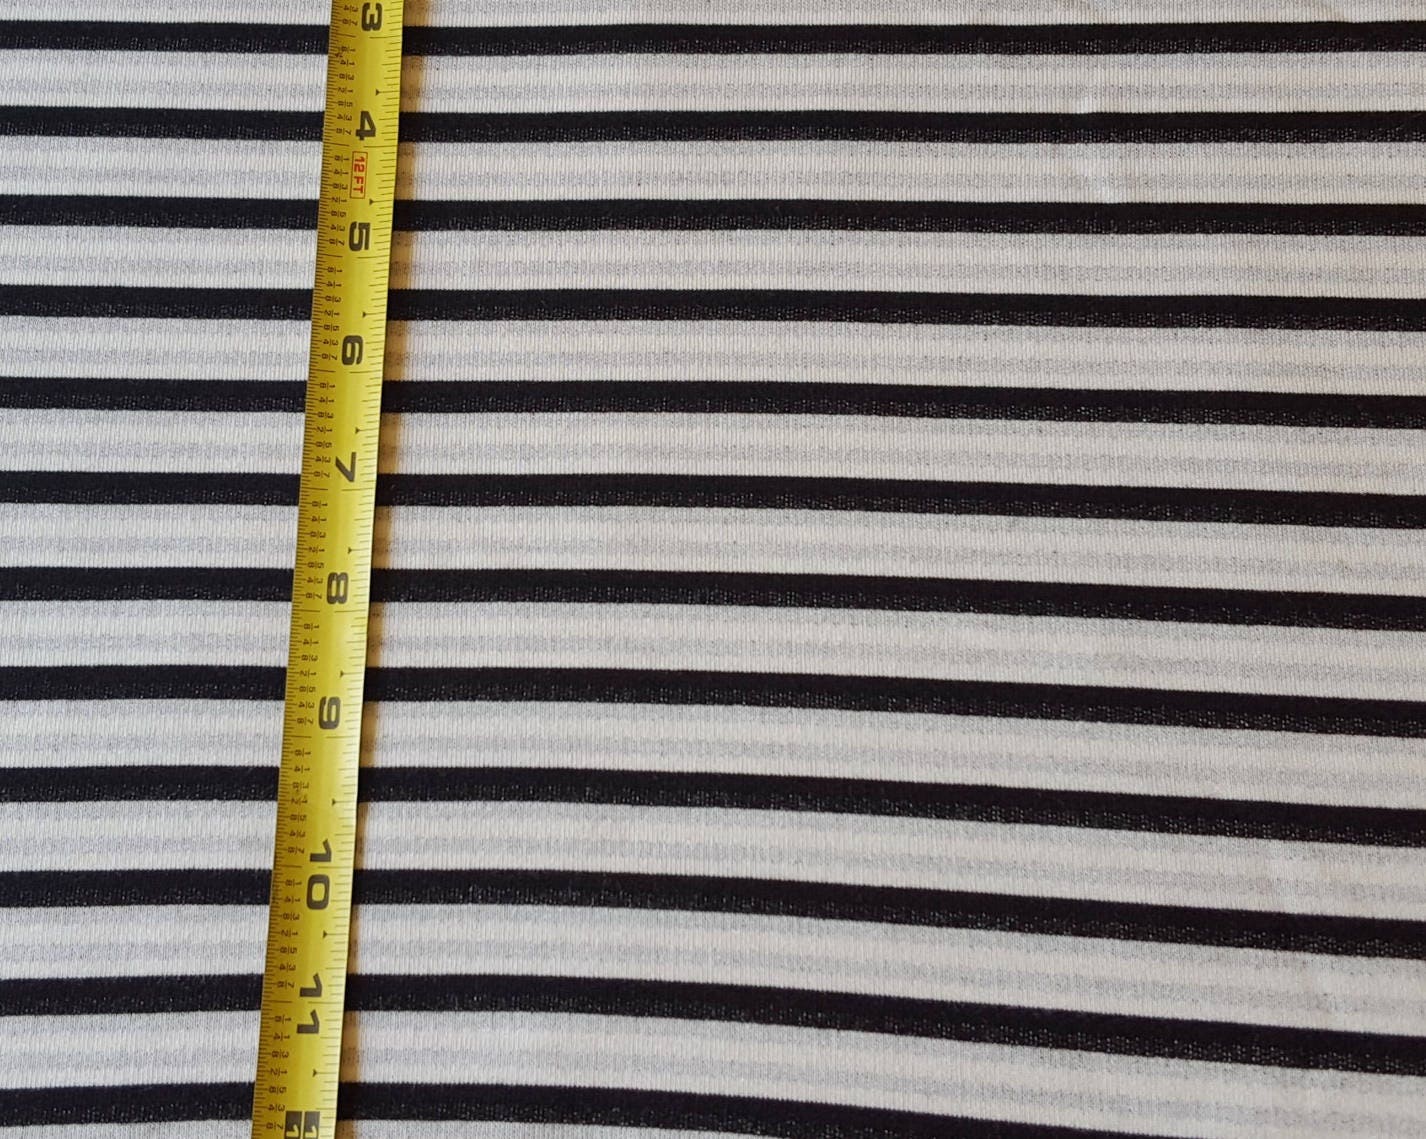 Off White Black Stripe Rayon Spandex French Terry Knit Fabric - Etsy